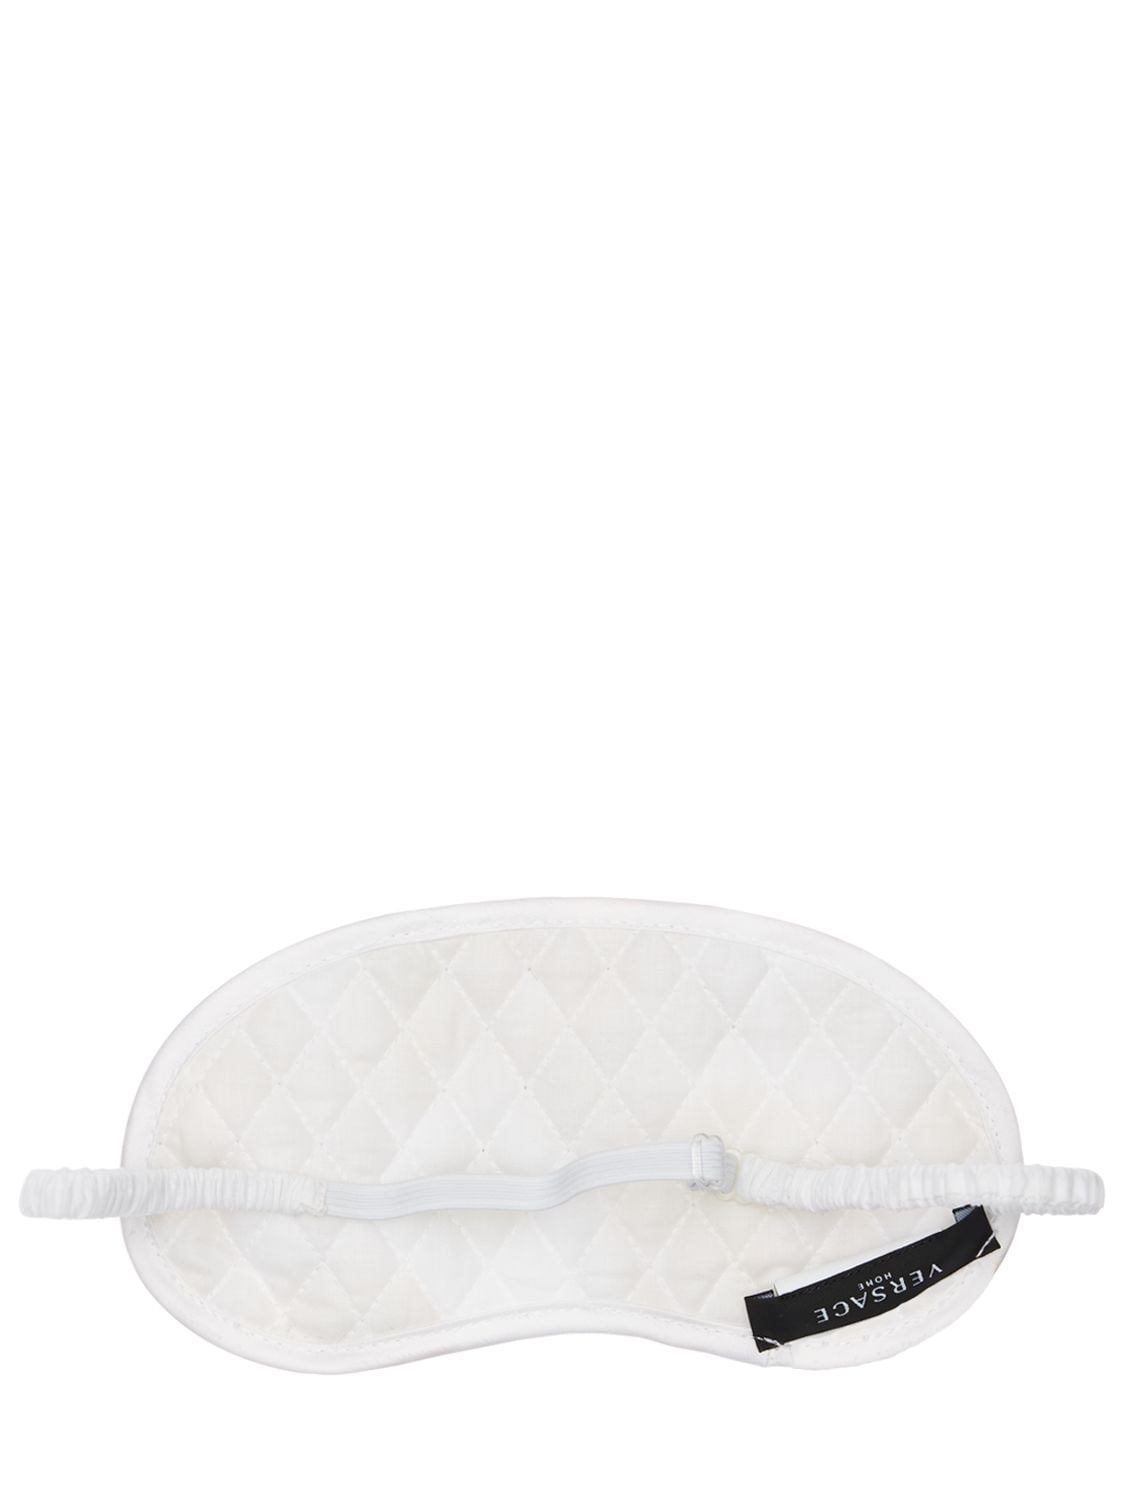 Shop Versace Medusa Amplified Cotton Eye Mask In White,gold